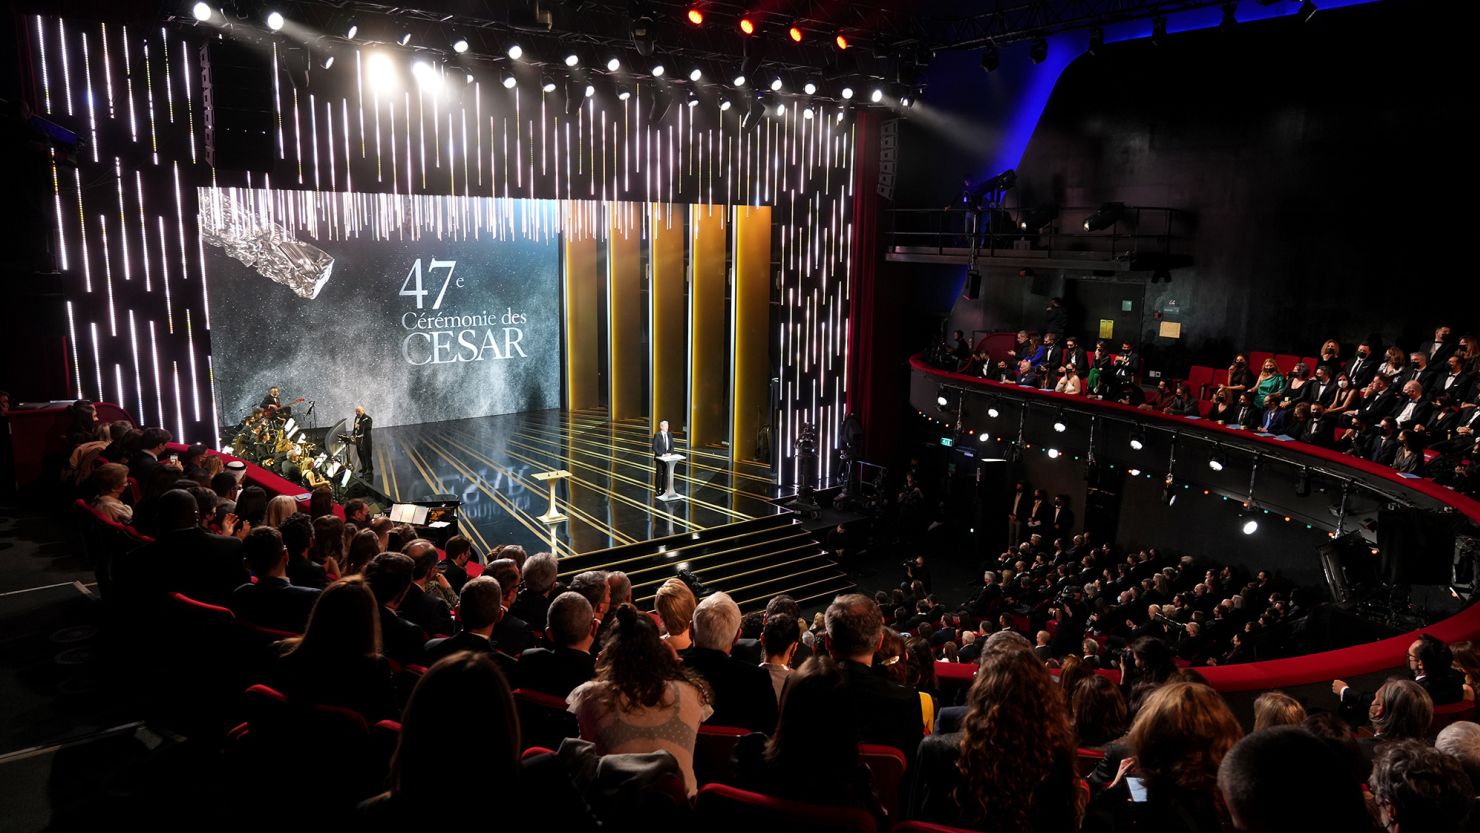 The César Award ceremony 2023 will be held on February 24 in Paris, France. 